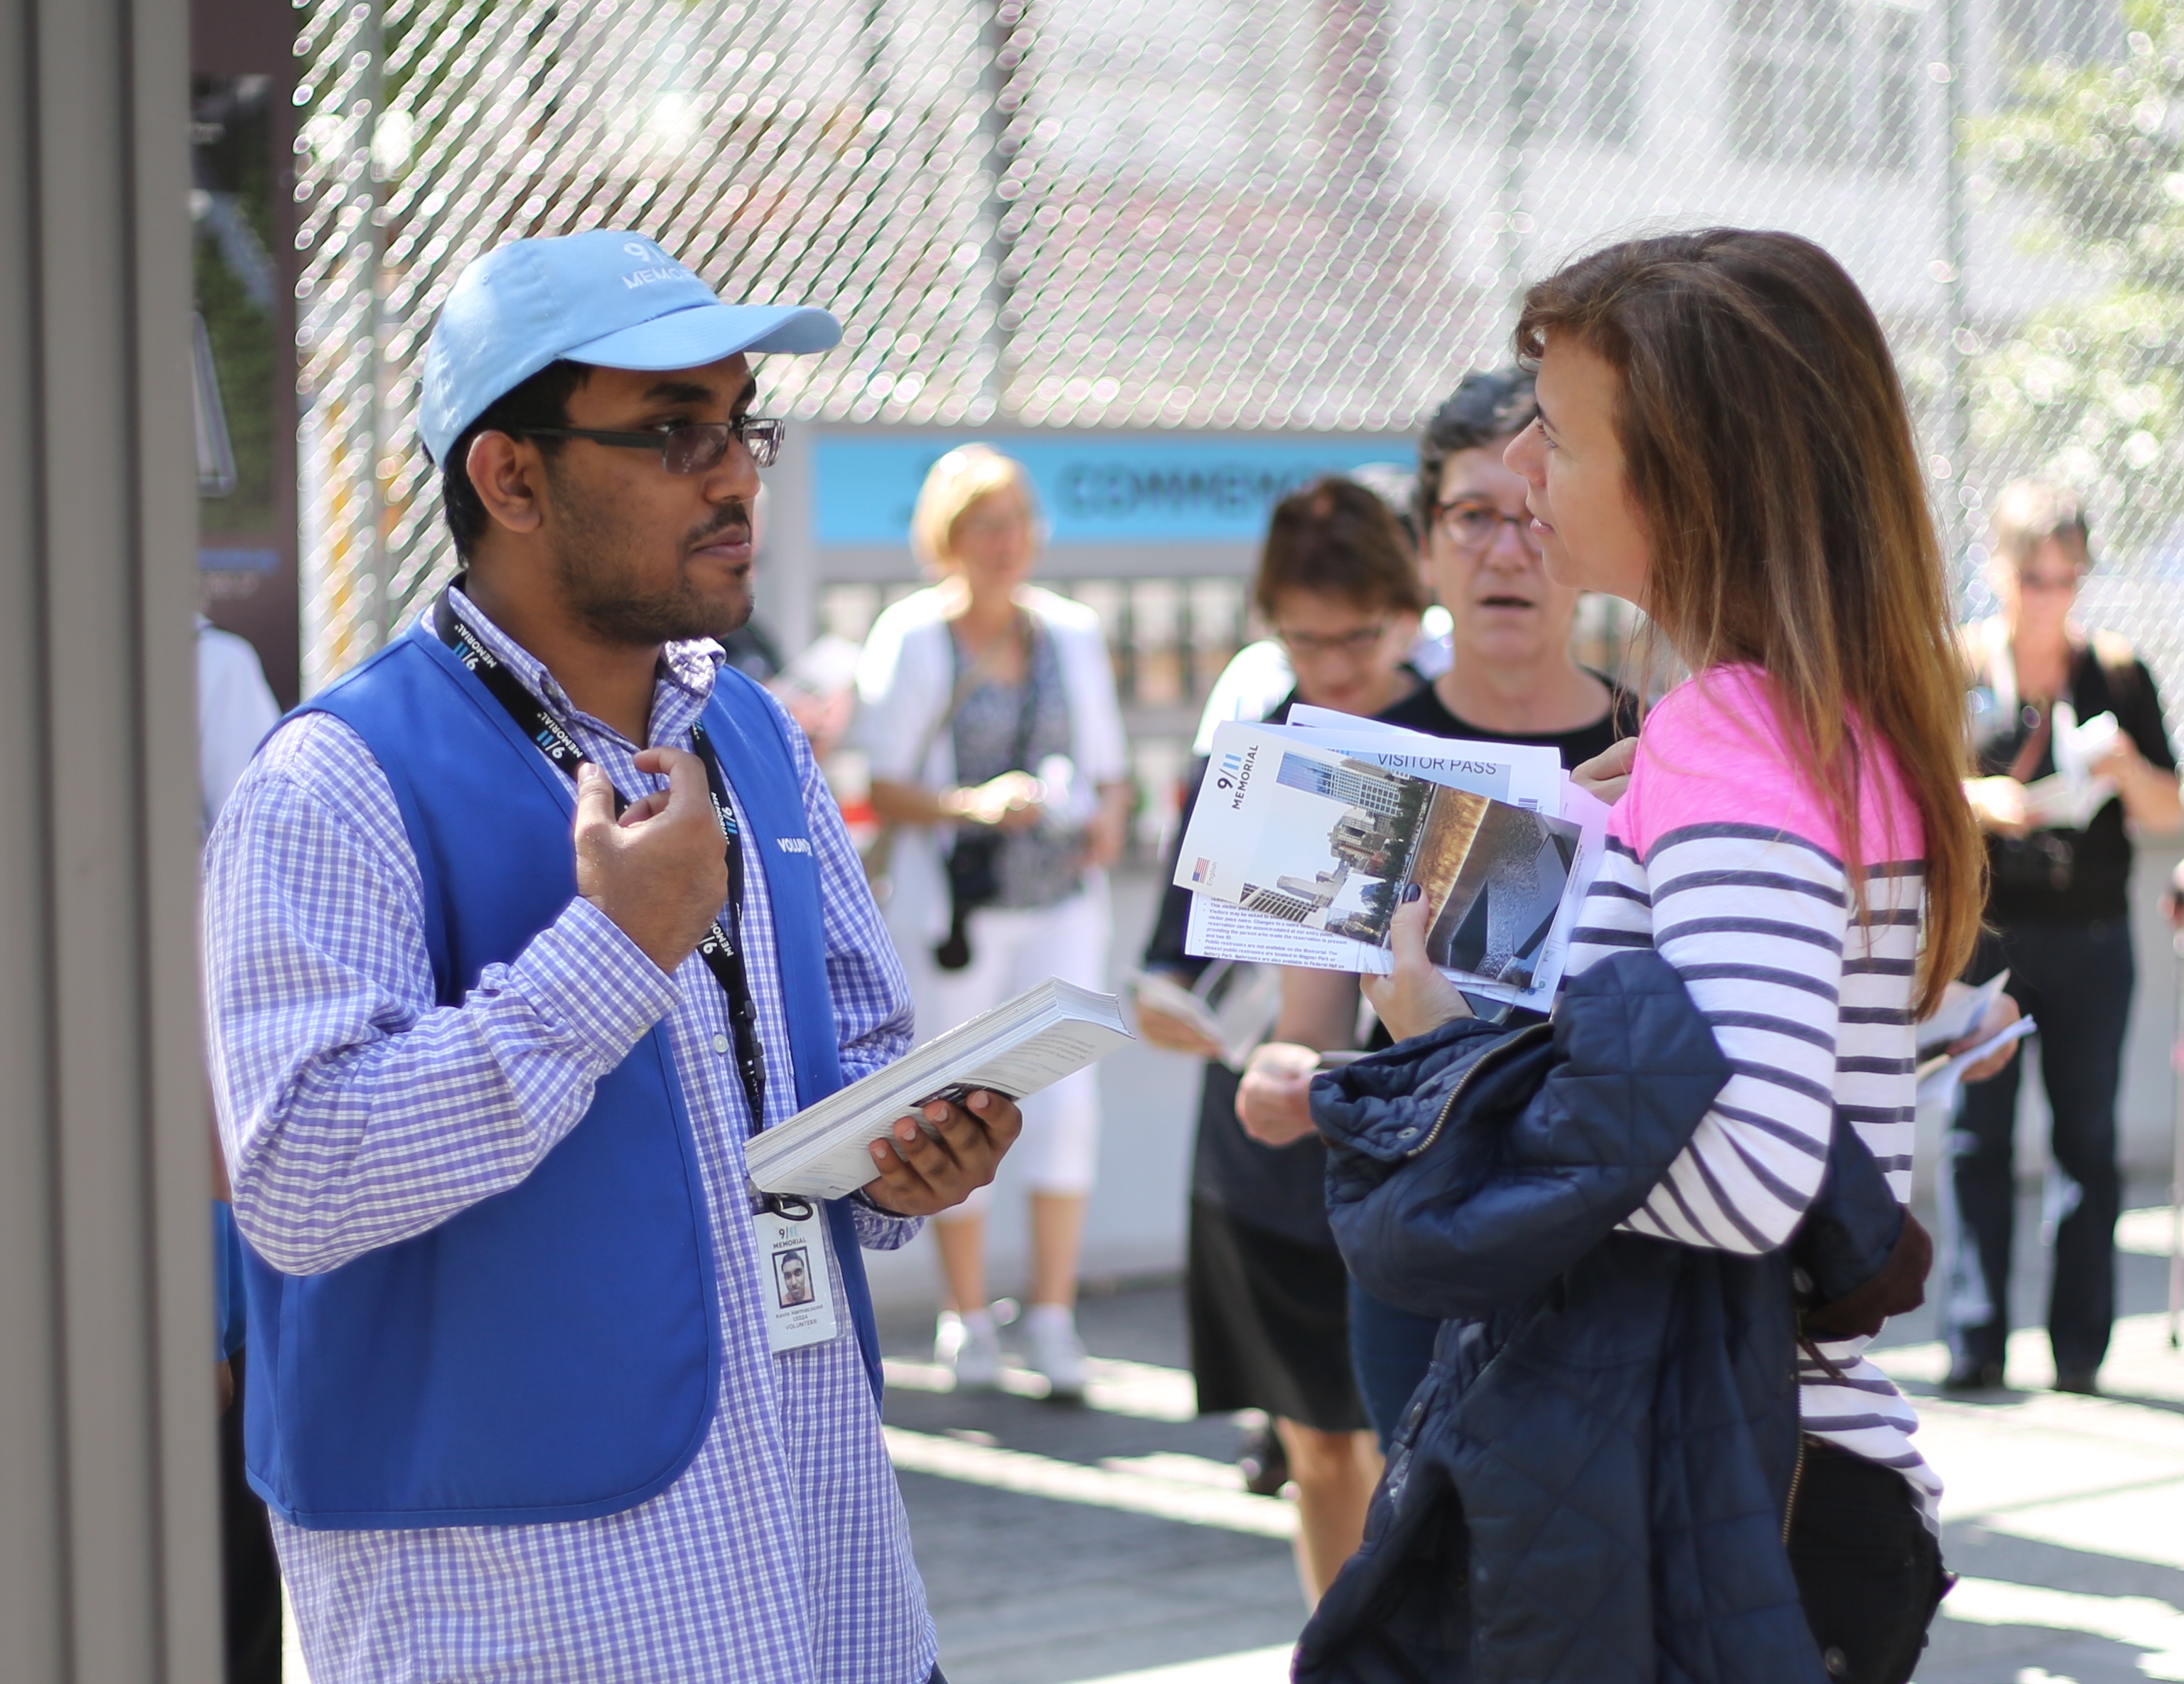 A 9/11 Memorial Museum volunteer speaks with a woman on the Memorial plaza. The volunteer is wearing a blue vest and a blue hat and grasping an informational booklet.